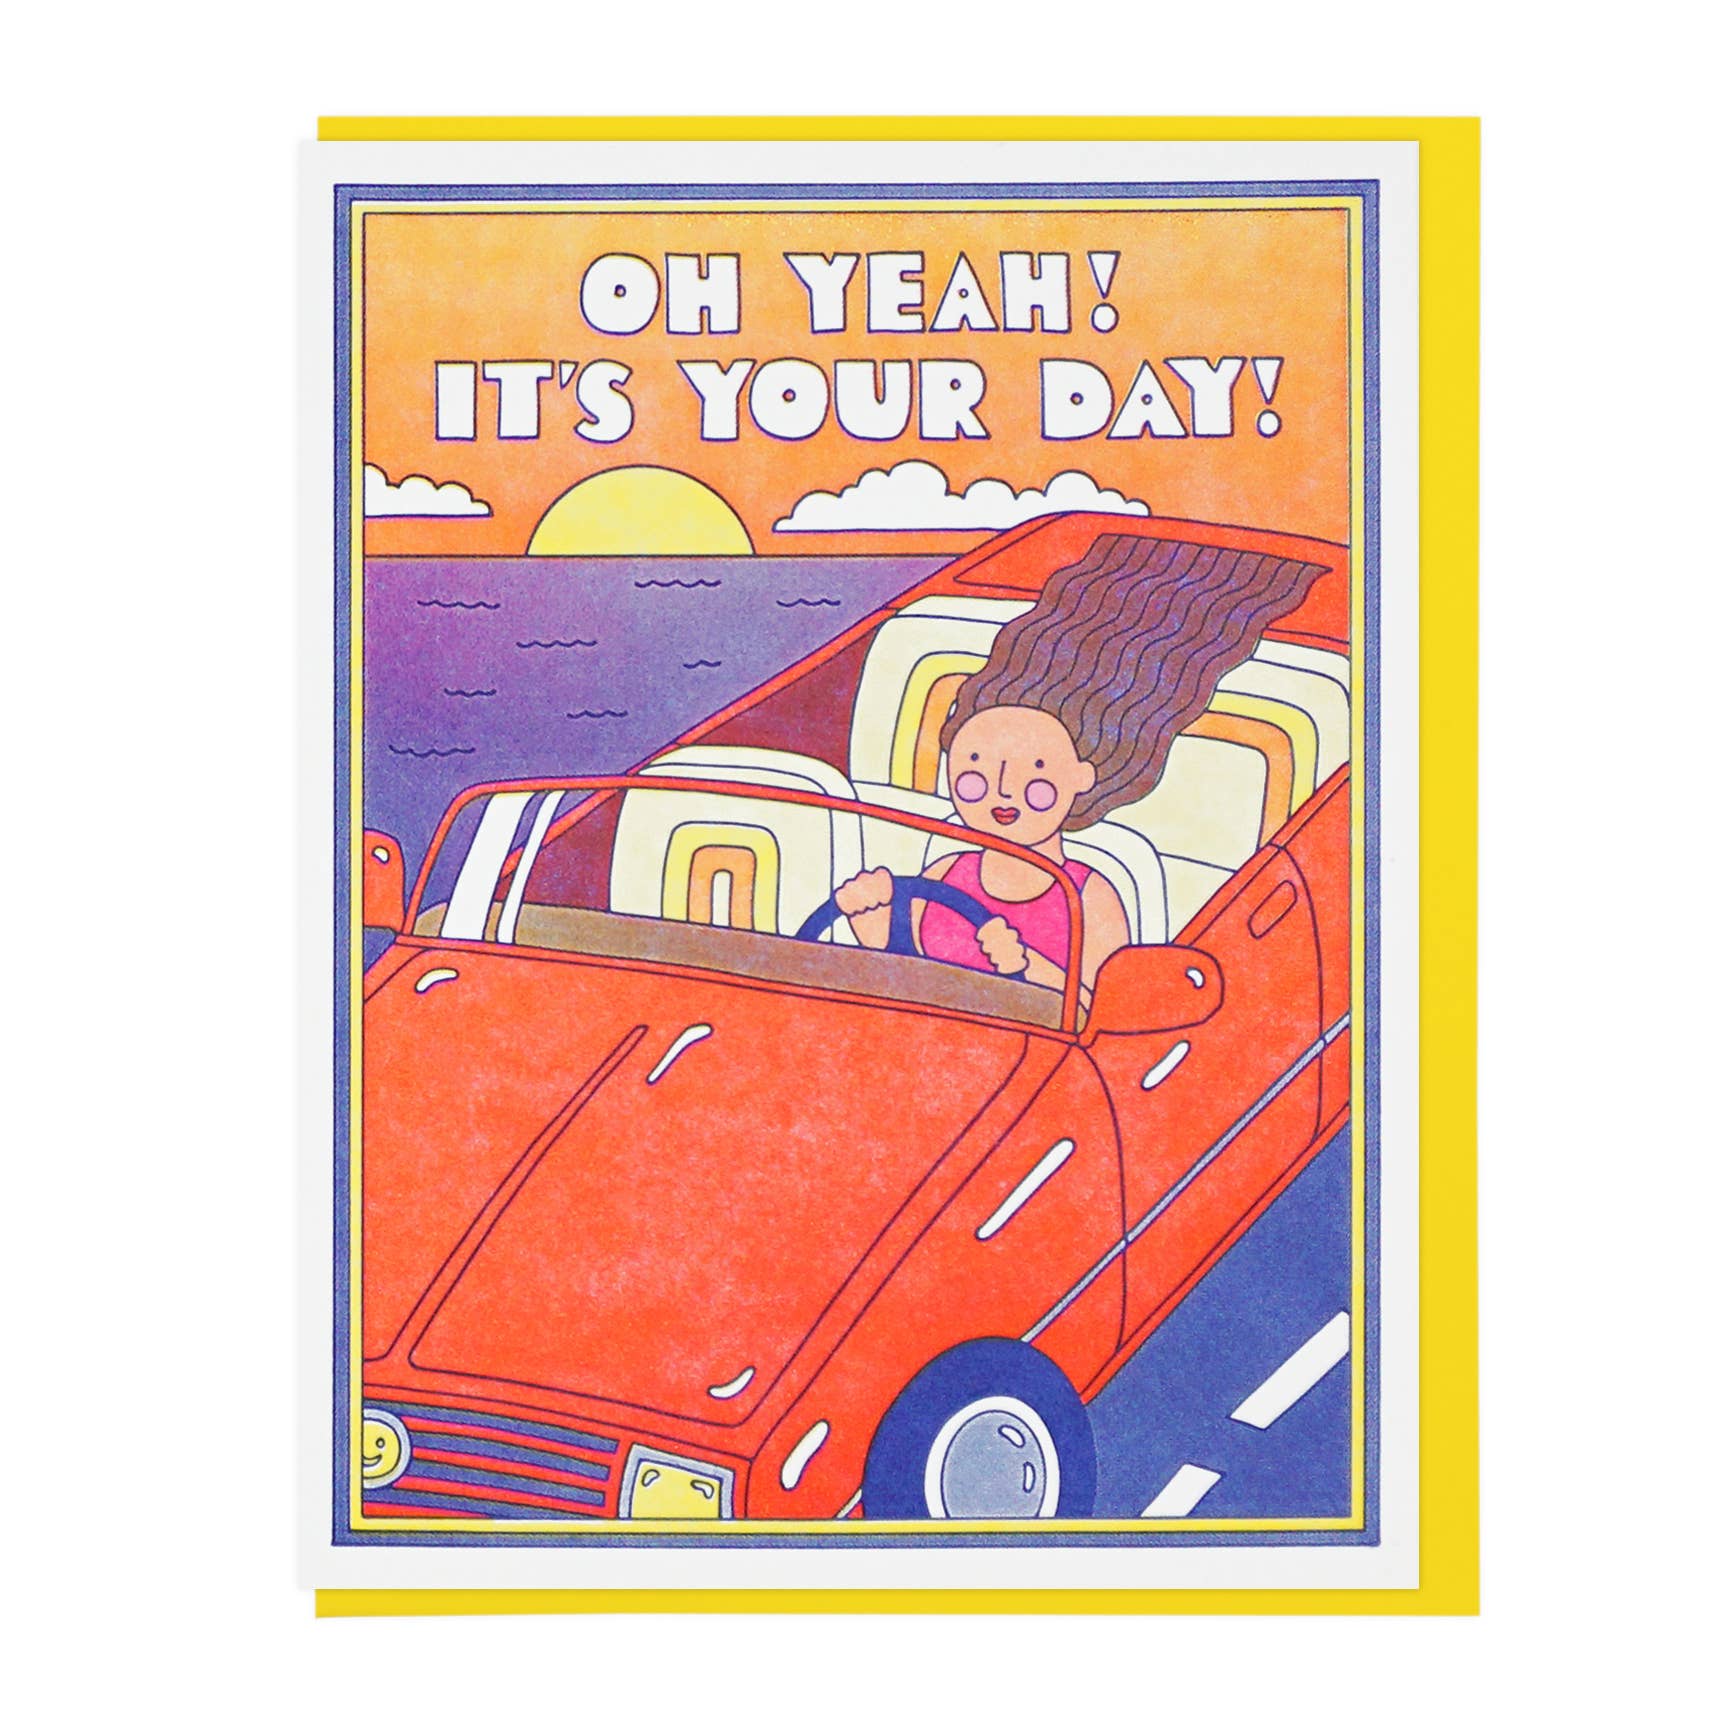 Oh Yeah! It's Your Day! Card